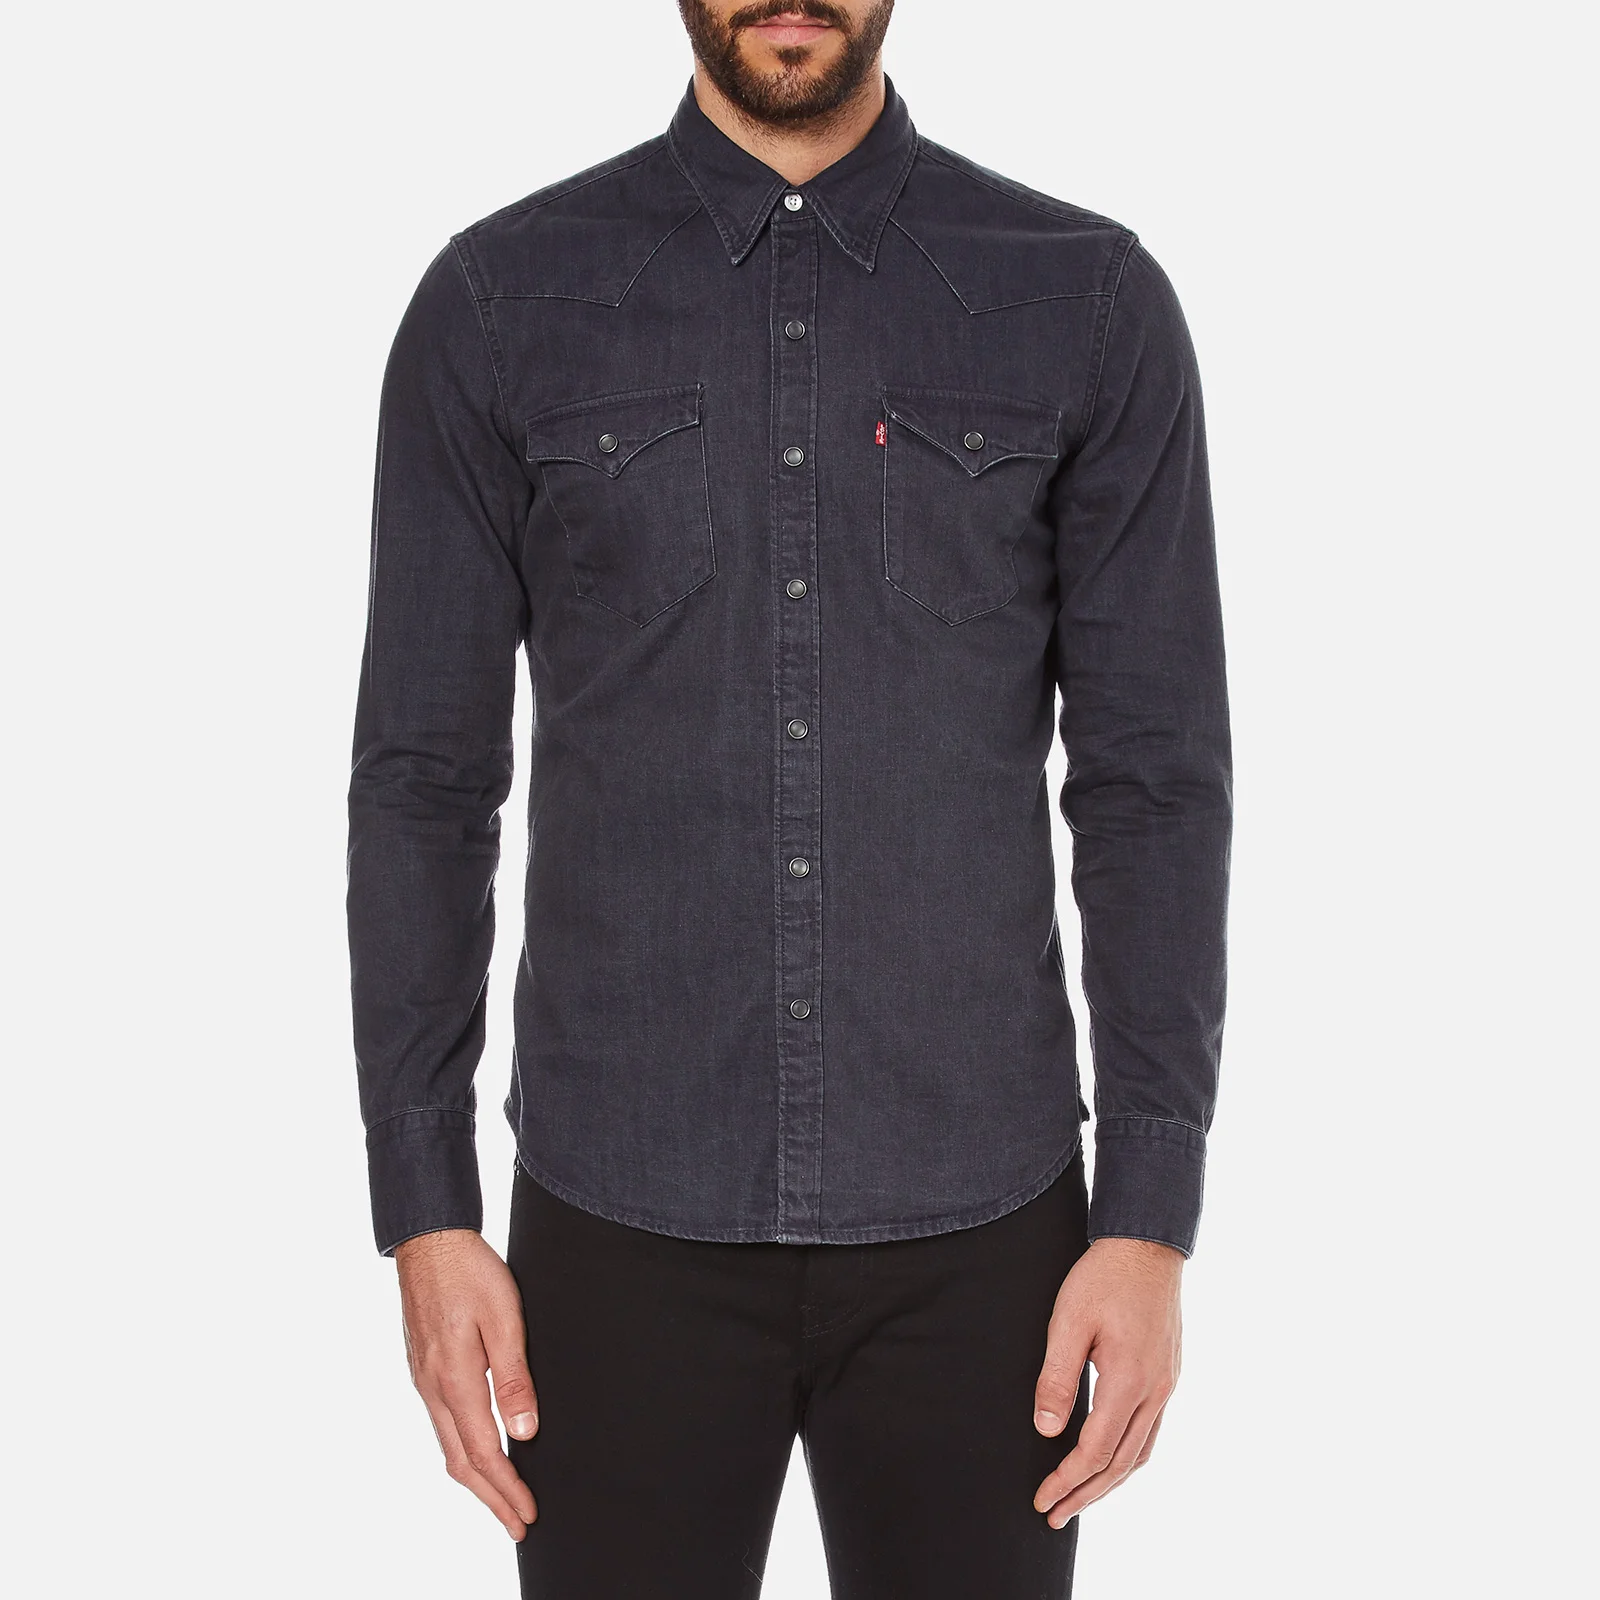 Levi's Men's Barstow Western Shirt - Inky Blue Image 1